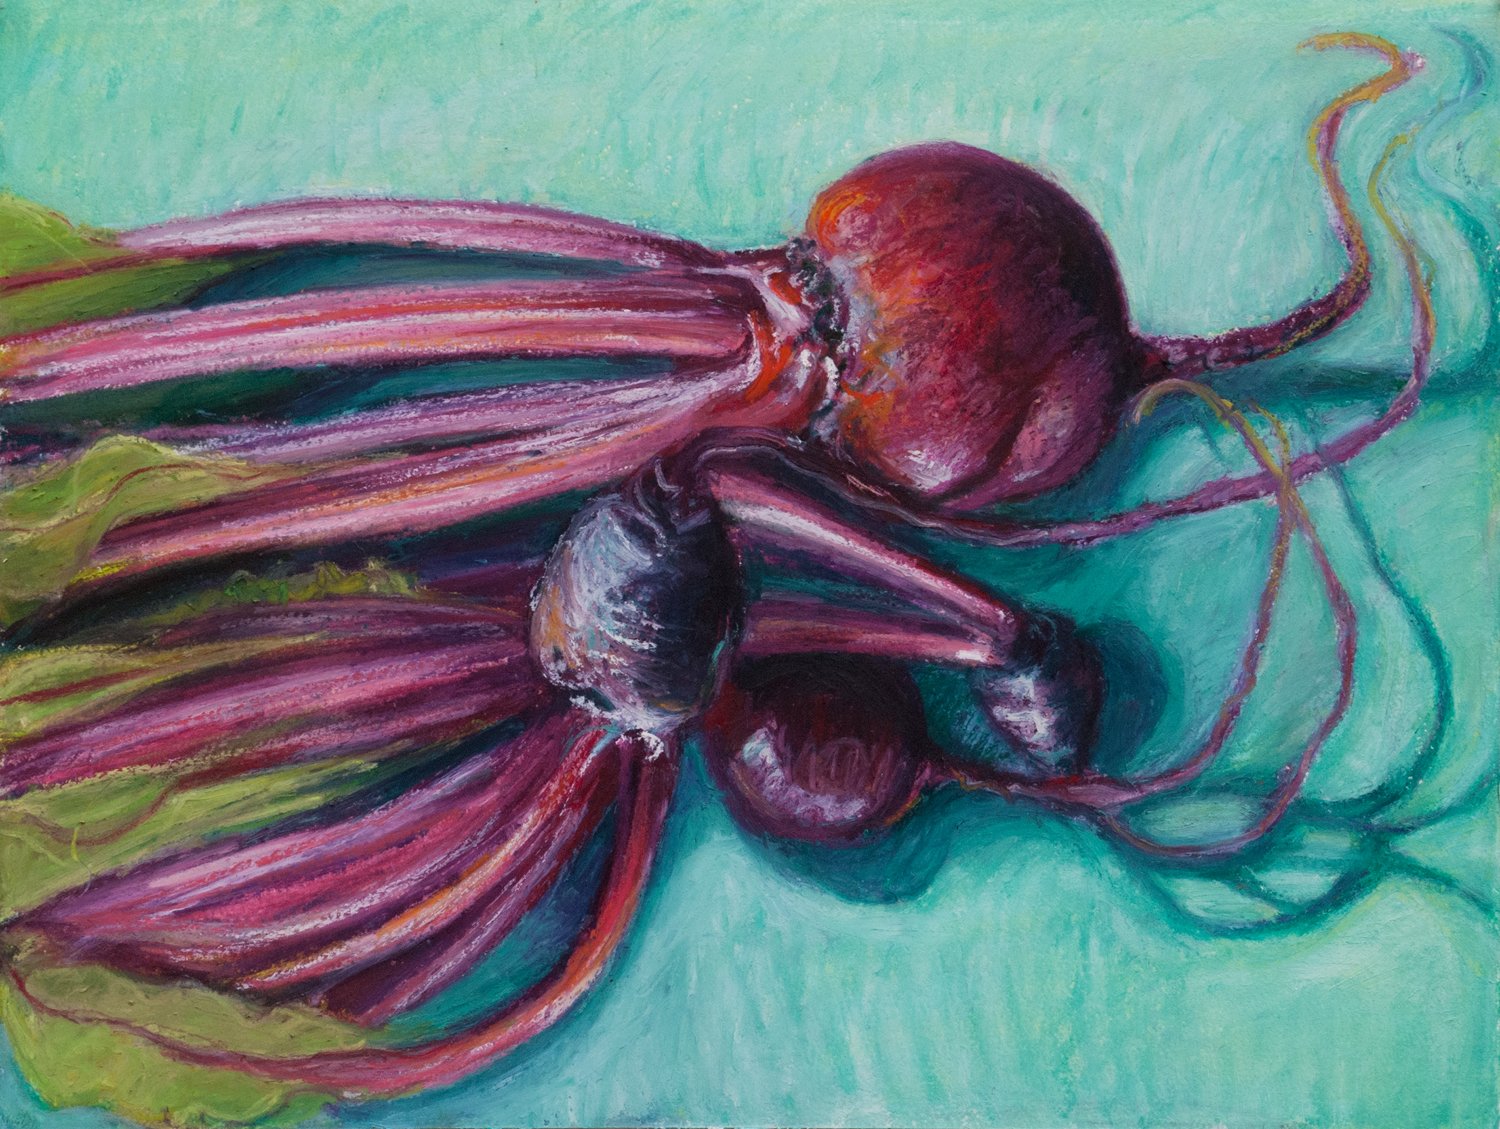 Beets on Teal #3